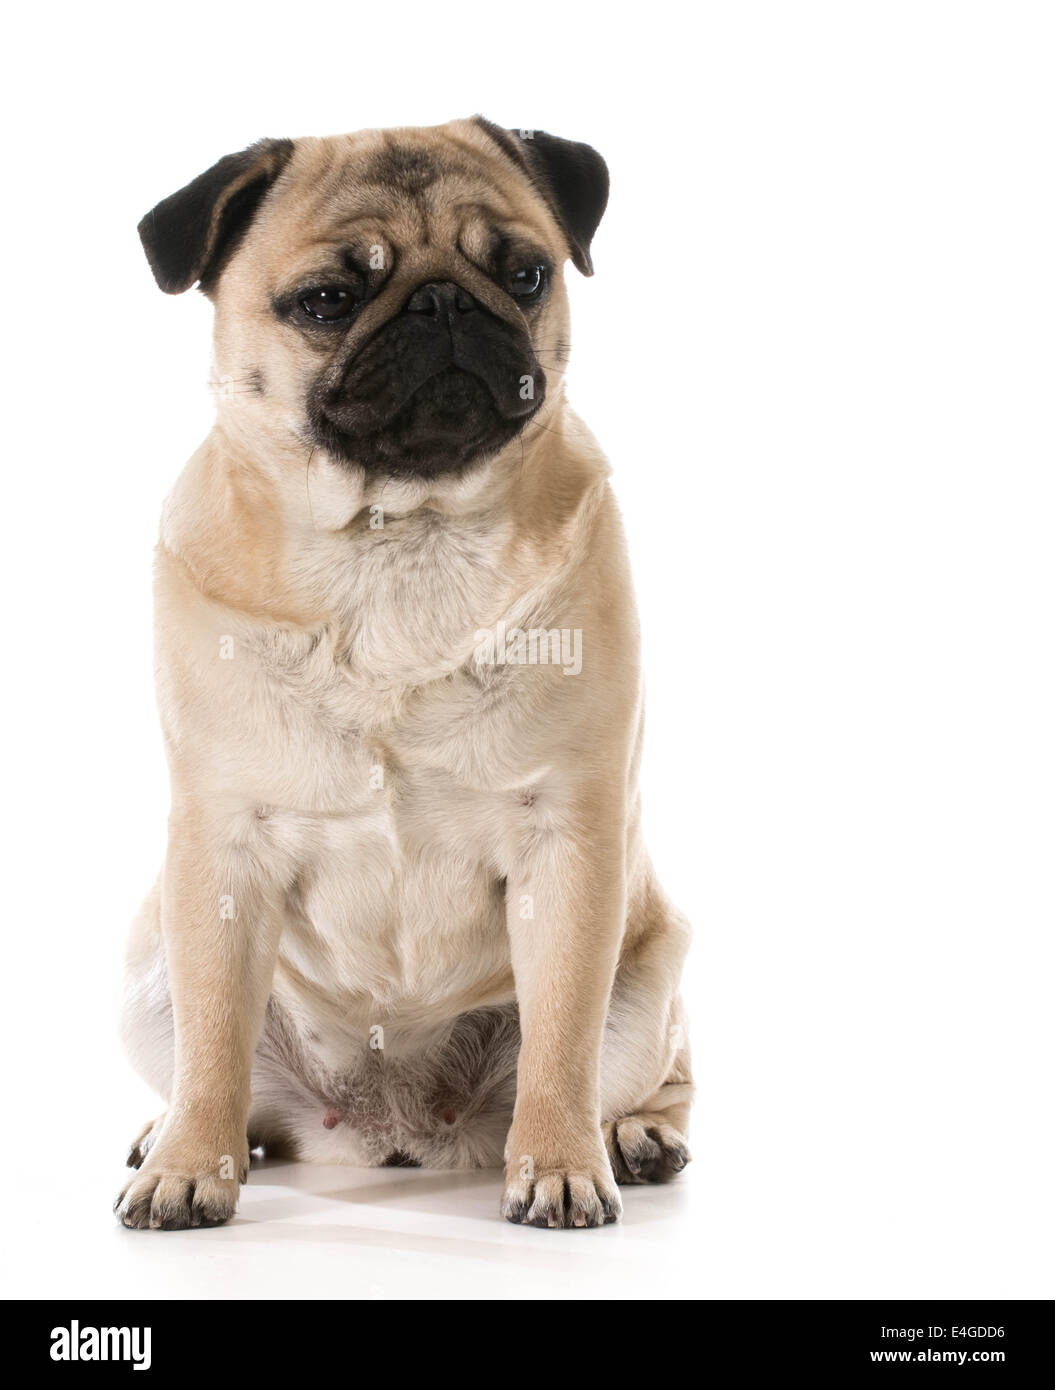 grumpy dog - pug with grouchy expression isolated on white background Stock Photo